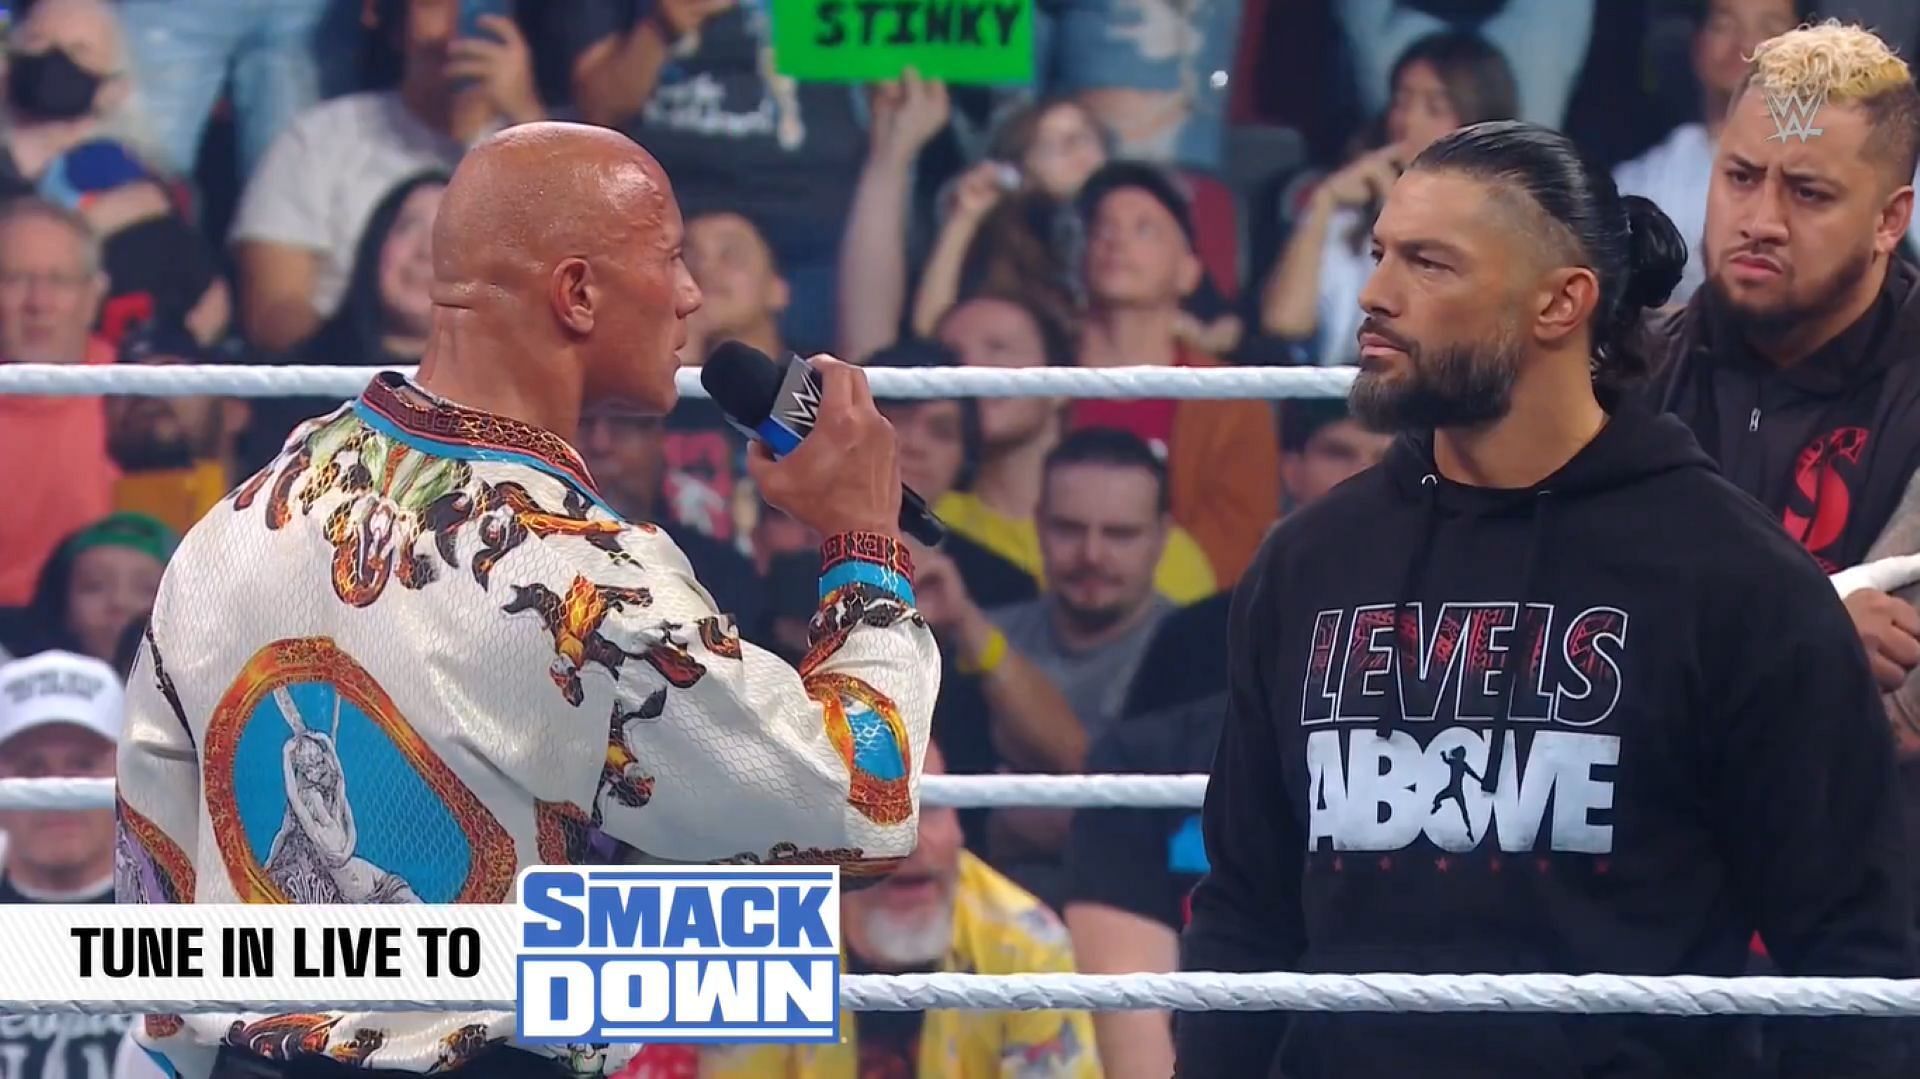 The Rock obliged his cousin when he had a special request on SmackDown.